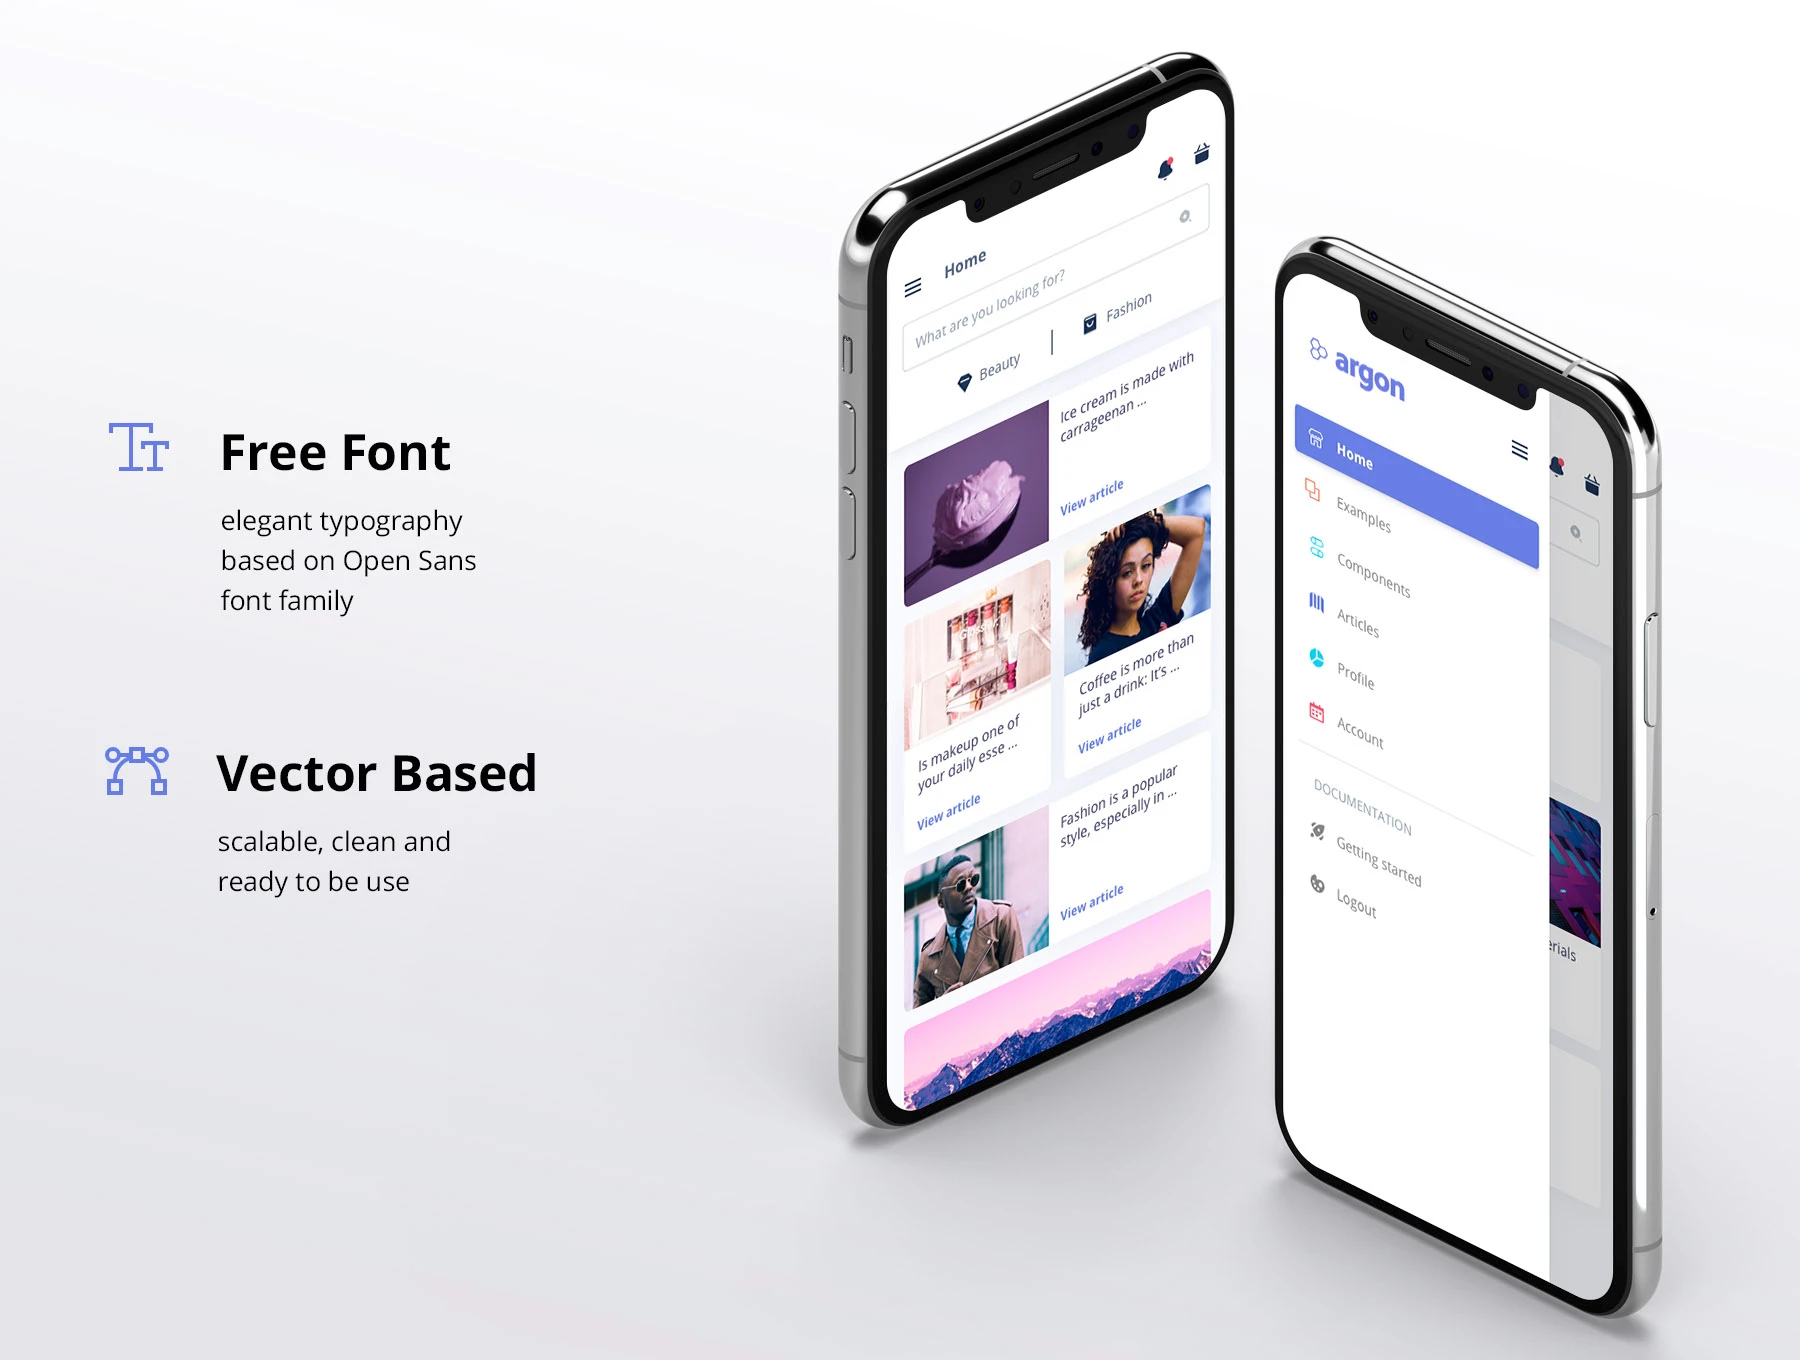 Argon Mobile UI Kit - Argon Mobile UI Kit accelerates the design process and helps you swiftly create fresh and complex designs. All the components are designed to look great together, following the same design pattern. Each screen is fully customizable, exceptionally easy to use and carefully assembled in Sketch, Figma, Adobe XD